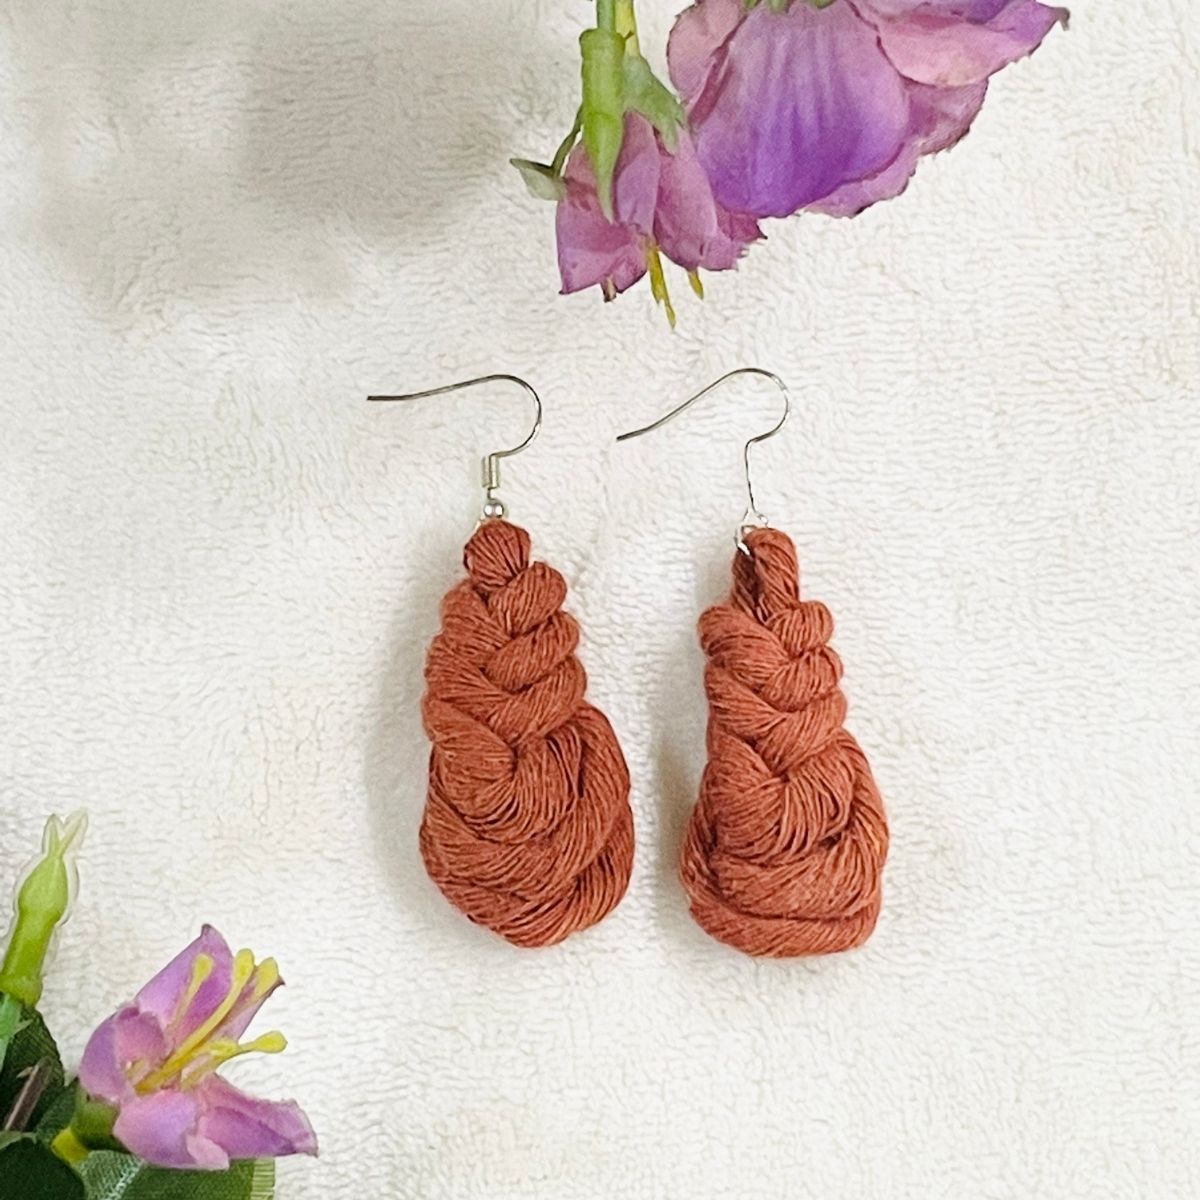 Red Macrame earrings pipa knot buy shop online india free shipping gifts for her valentines day birthday mothers bridesmaid christmas wholesale bulk gift